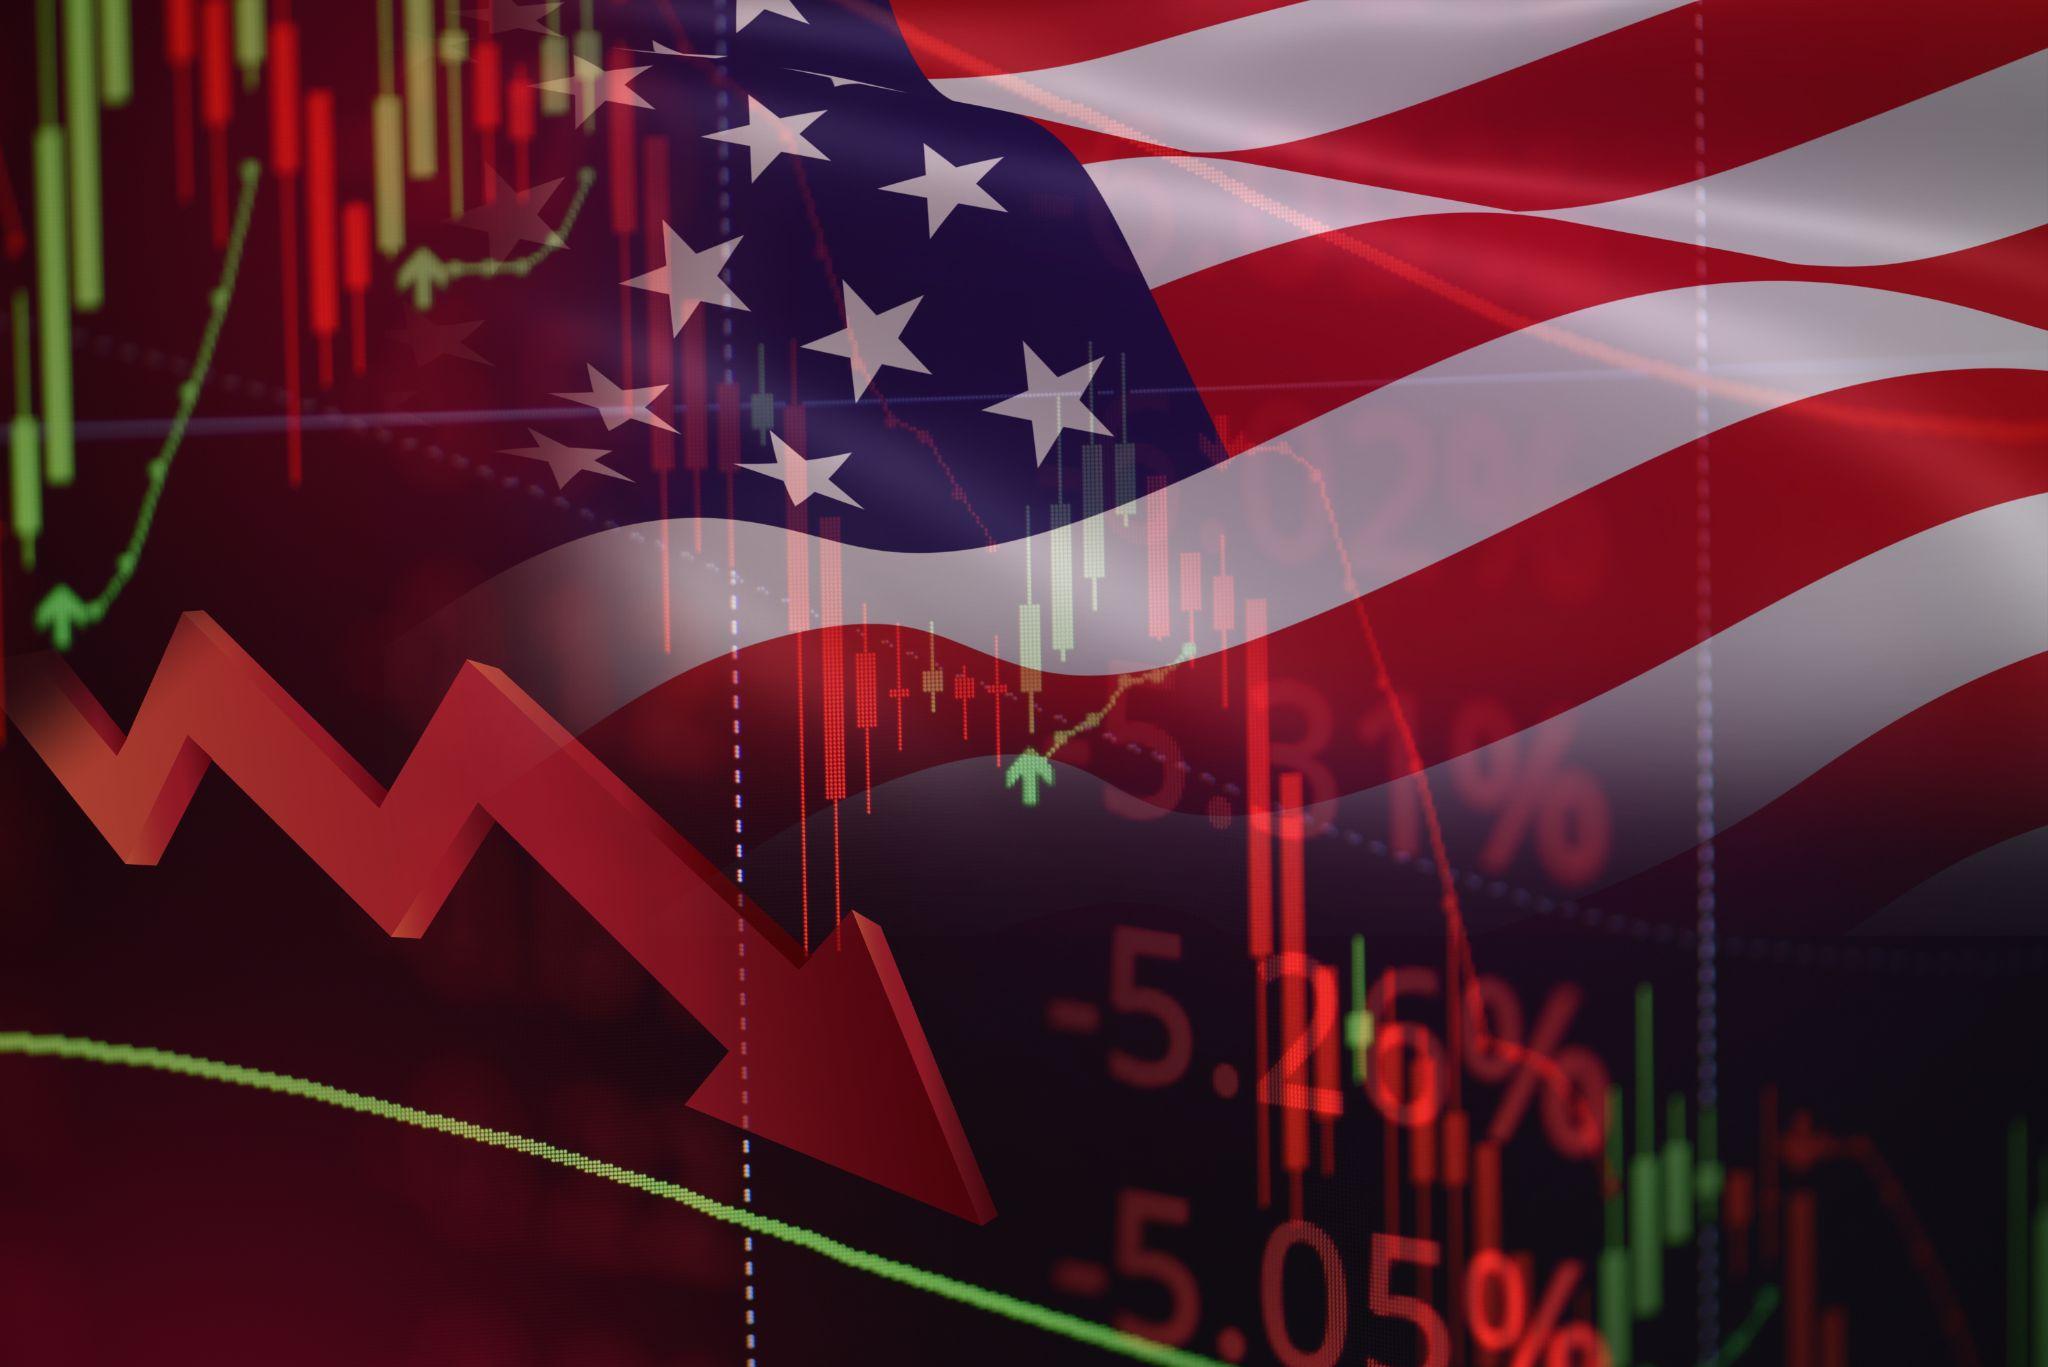 American flag with stock market concept.